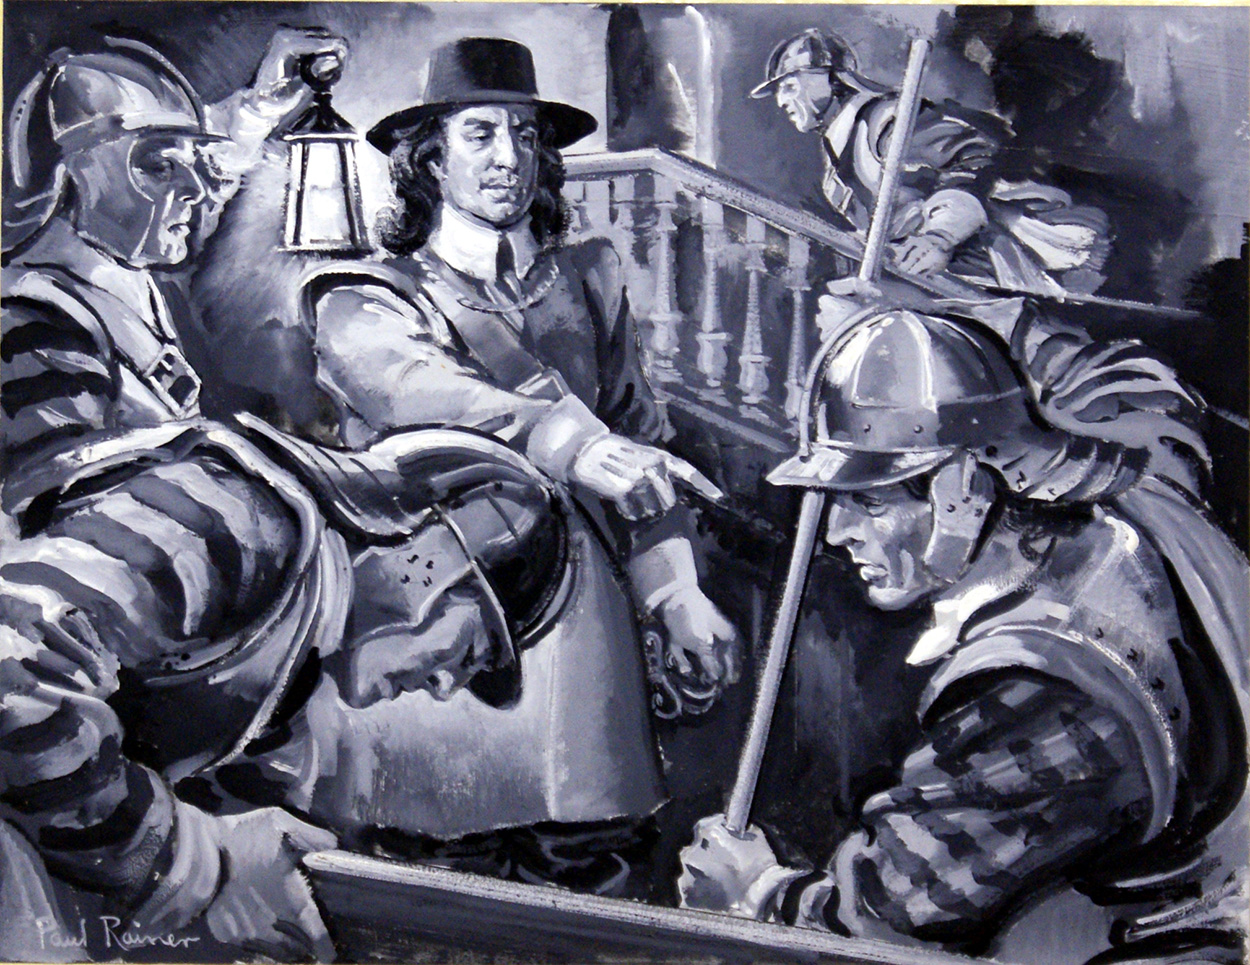 Cromwell and Roundheads (Original) (Signed) art by Paul Rainer Art at The Illustration Art Gallery